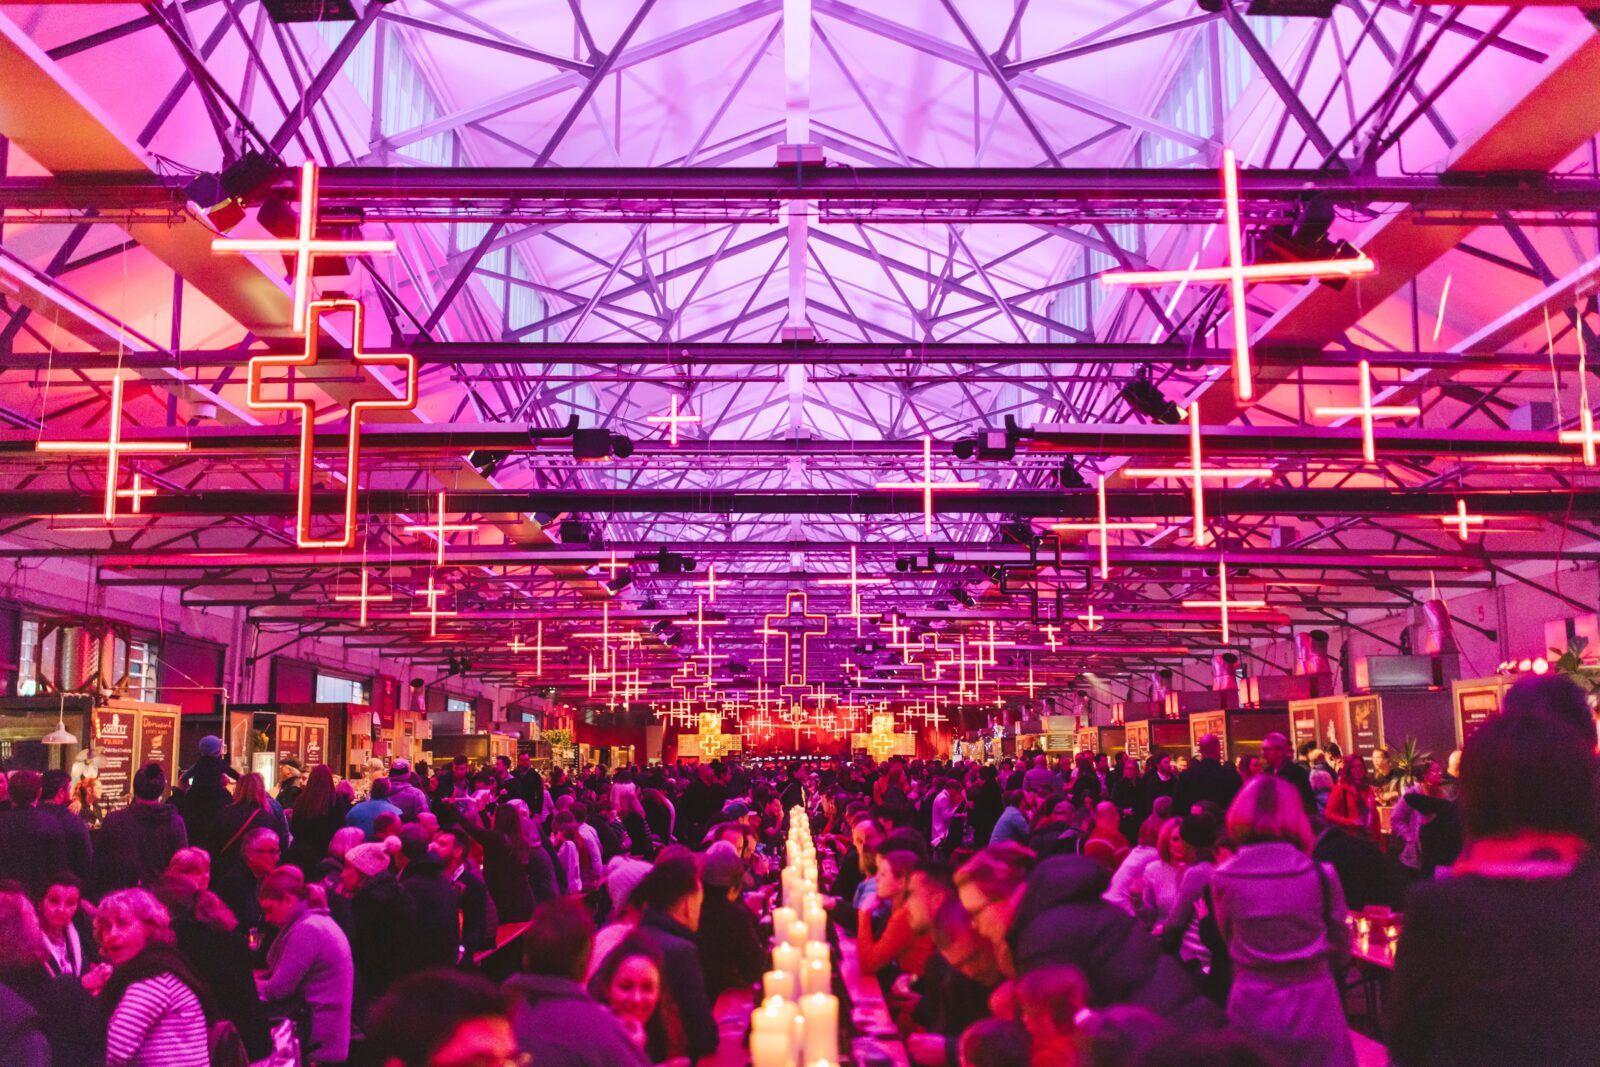 Under neon crosses and candlelight, diners fill the long banquet hall of the Dark Mofo Winter Feast